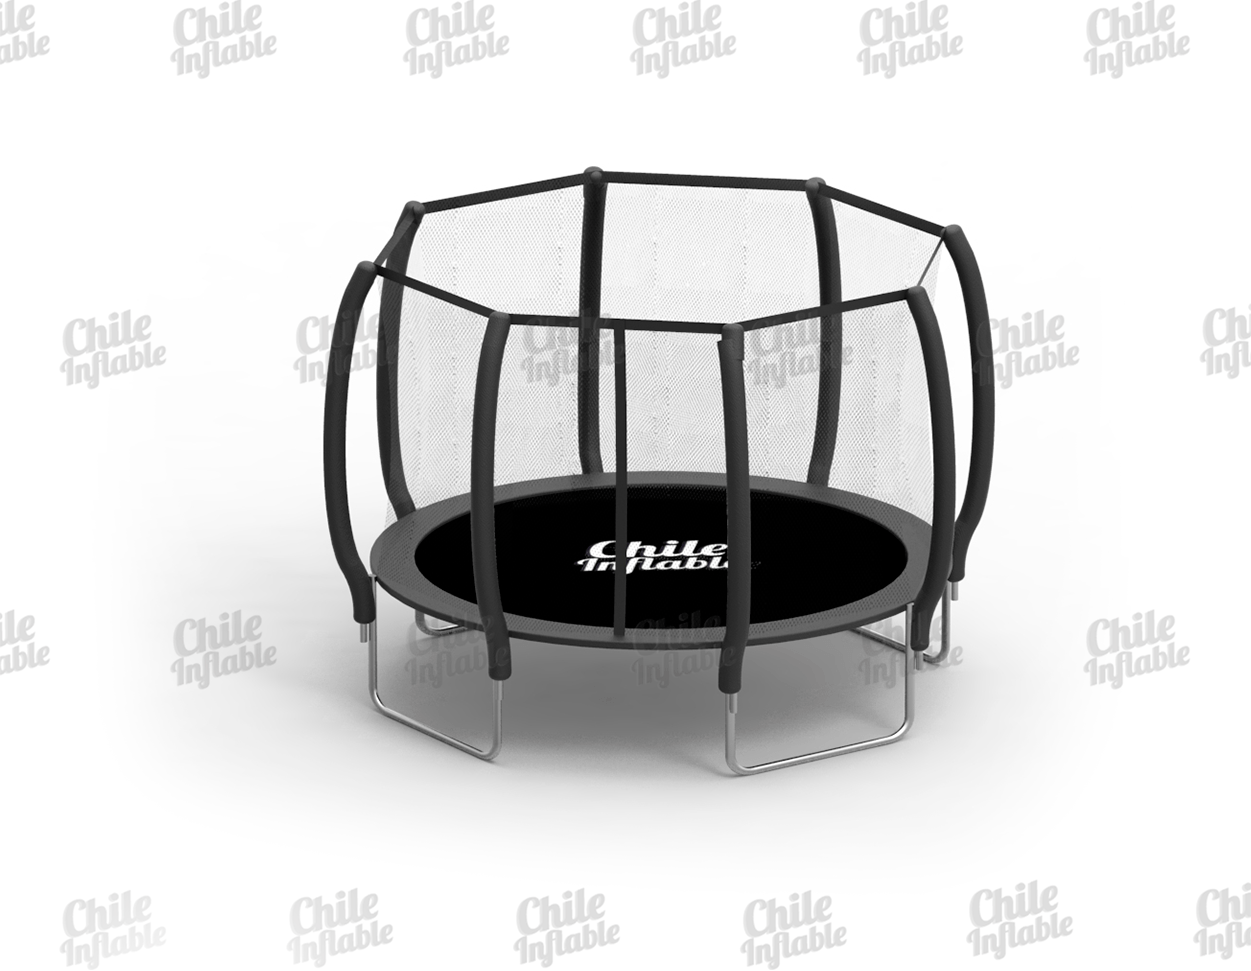 Cama Elástica 3.66 m Silver - ChileInflable